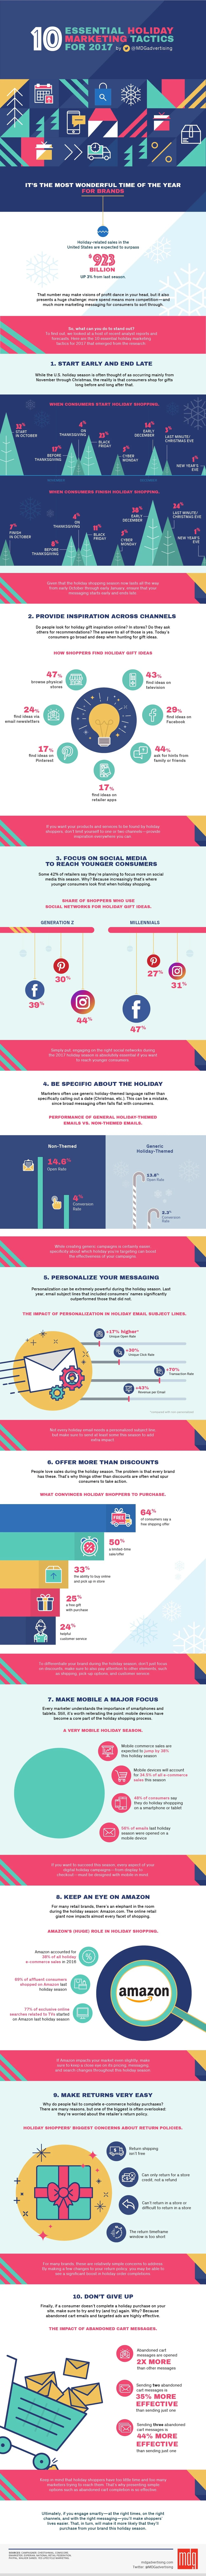 10 Essential Holiday Marketing Tactics for 2017 - #infographic